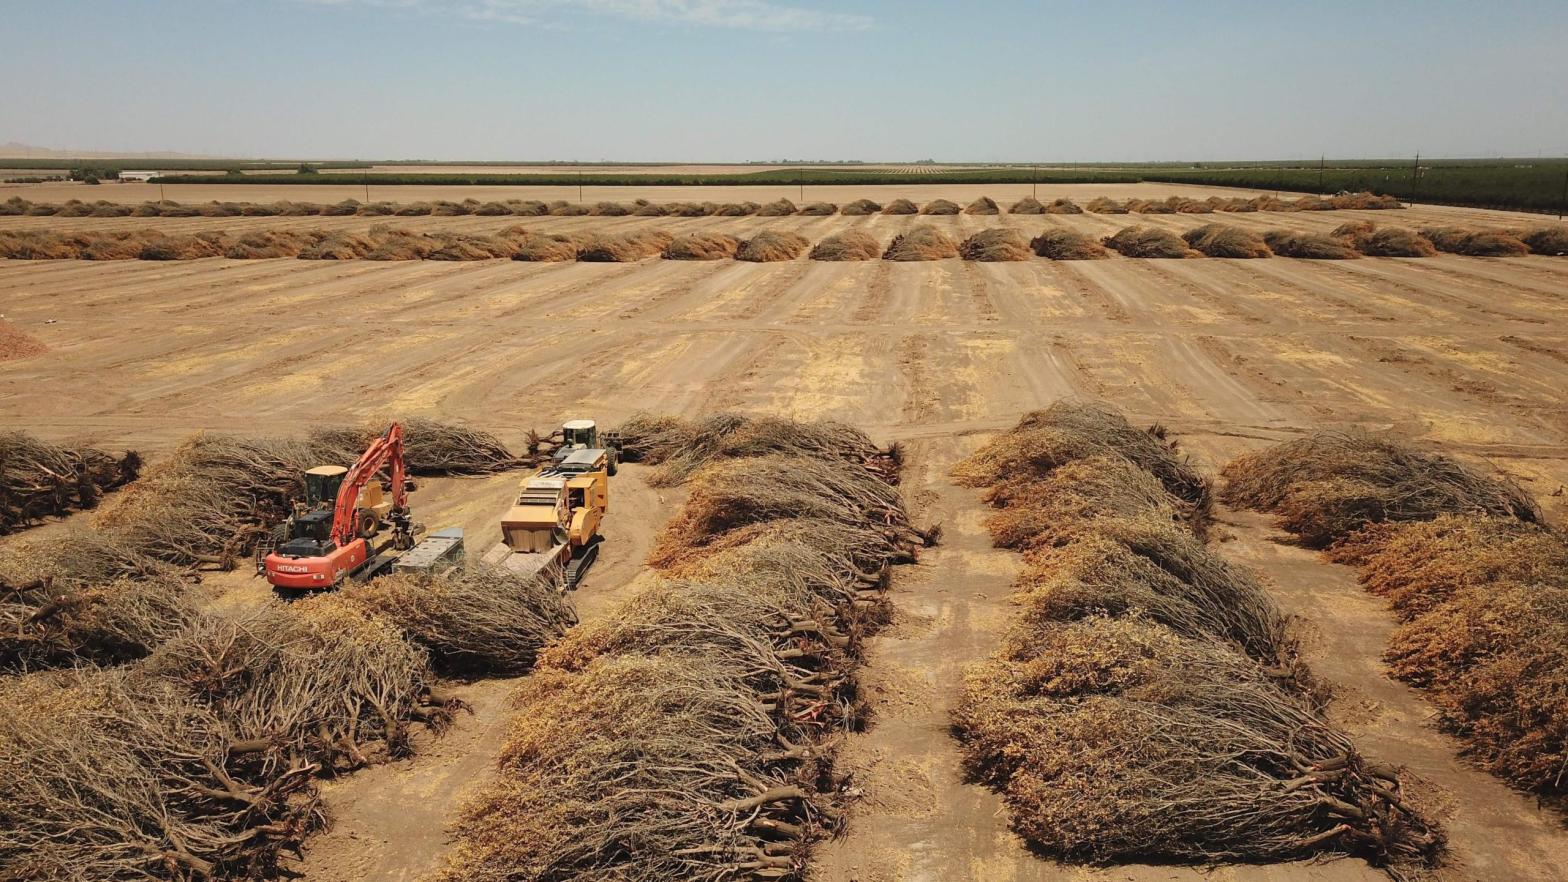 Dead almond trees lie in an open field after they were removed by a farmer because of a lack of water to irrigate them, in Huron, California. (Photo: Robyn Beck/AFP, Getty Images)